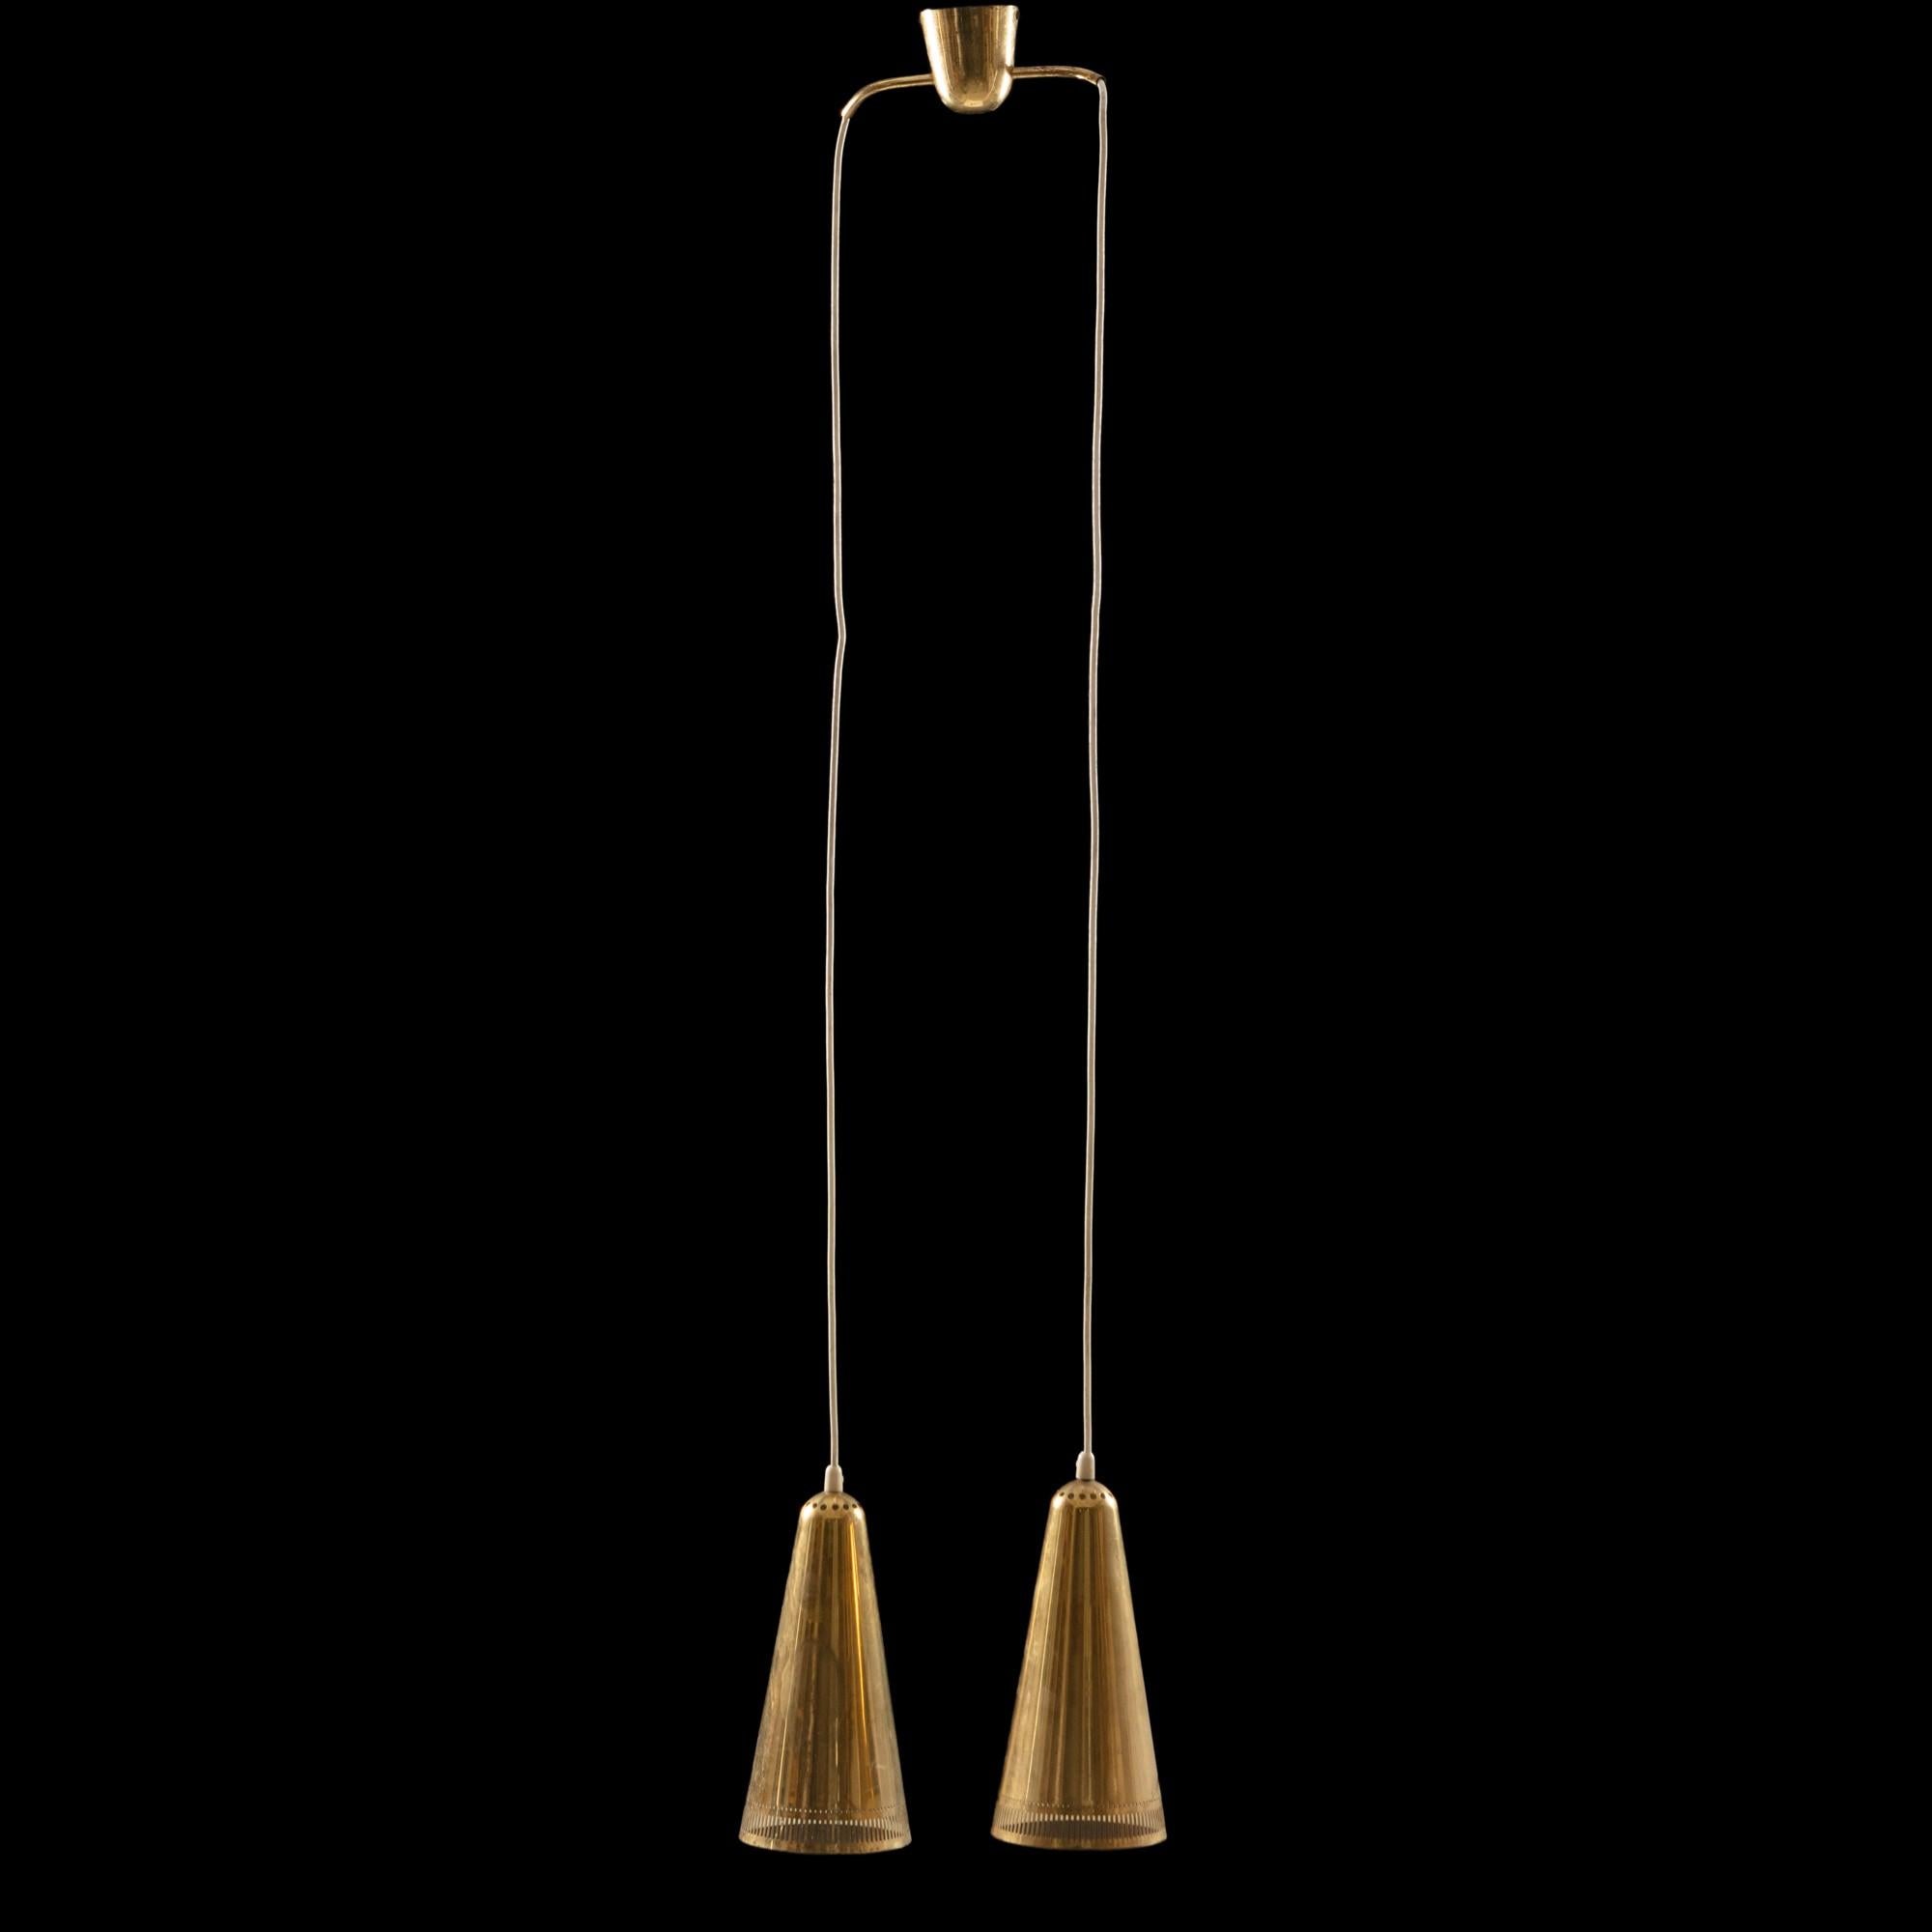 Rare ceiling pendat with 2 perforated brass domes ( 31 cm high & 15 cm diameter each) by Mauri Almari, executed by Itsu in Finland in the 1950s.
The mounted height shown in the picture is 200 cm, but can be adjusted shorter or longer by the